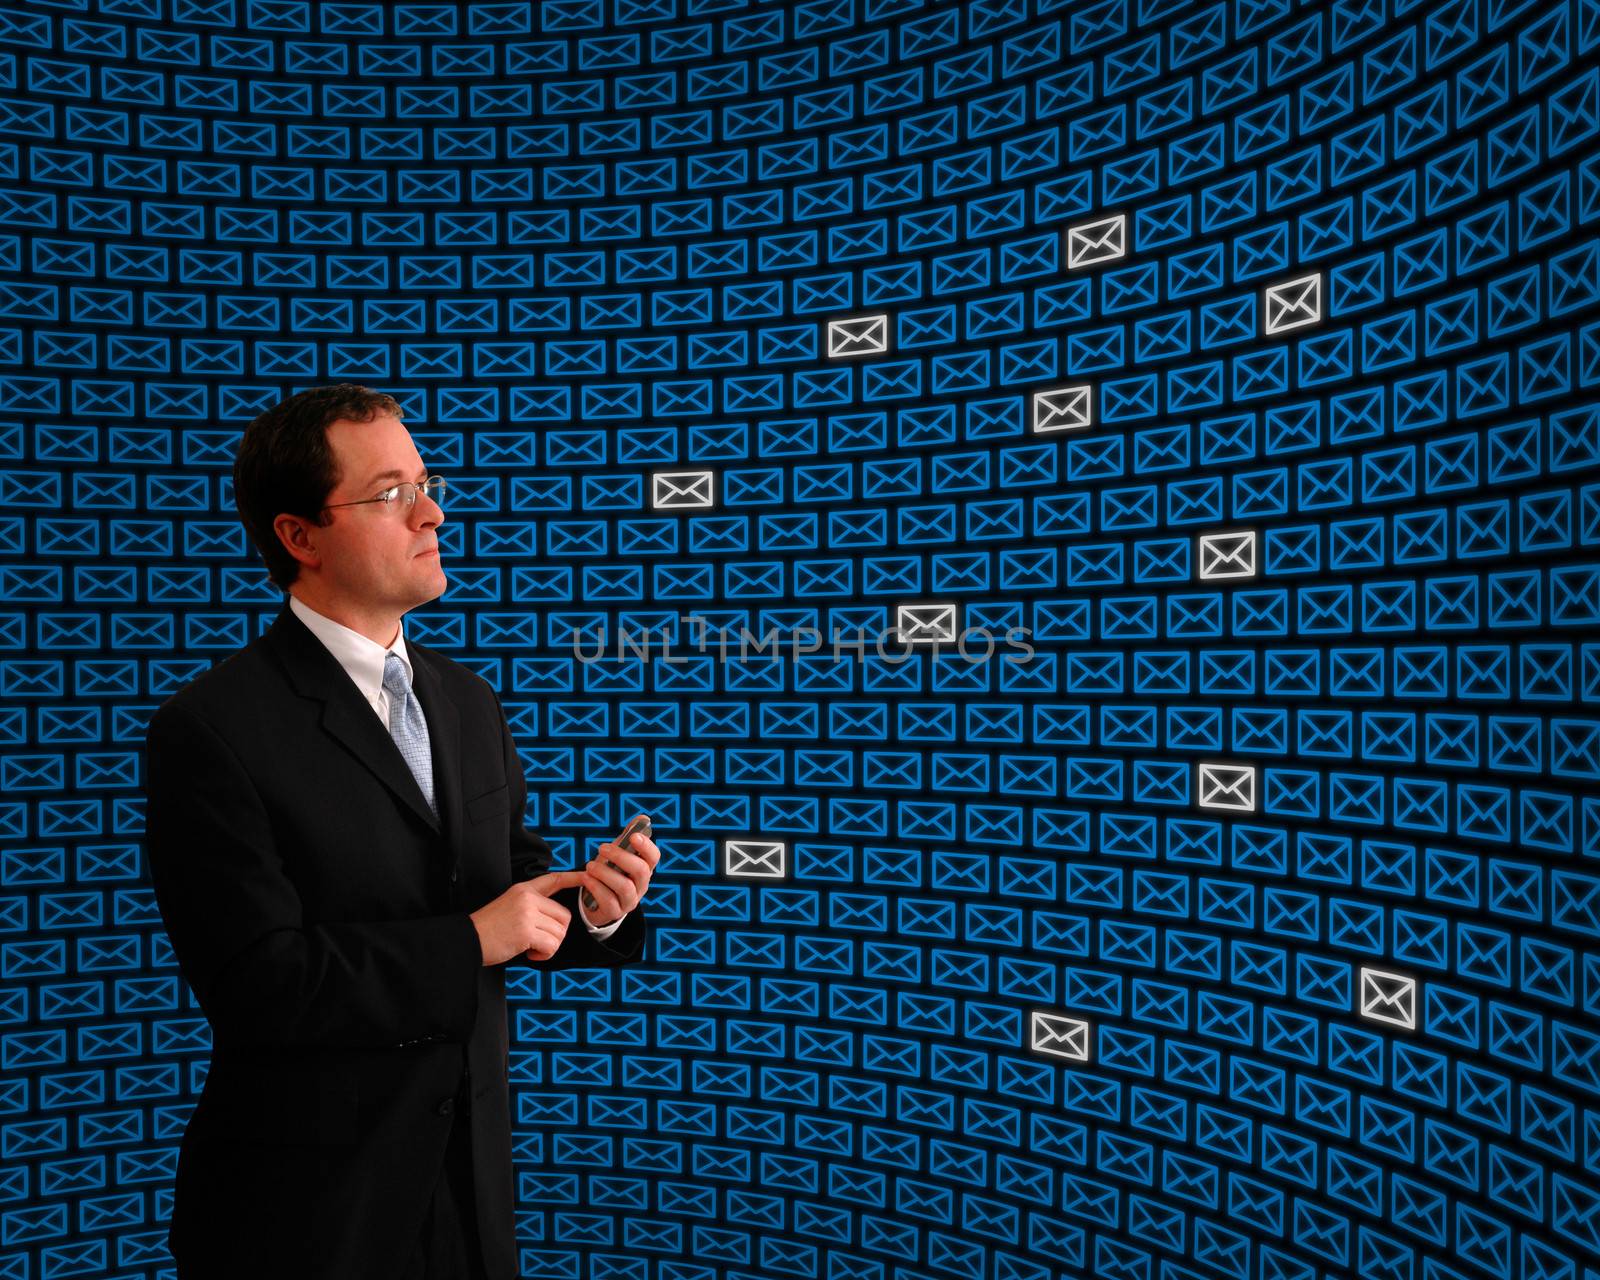 Man monitoring an array of email icons by Balefire9